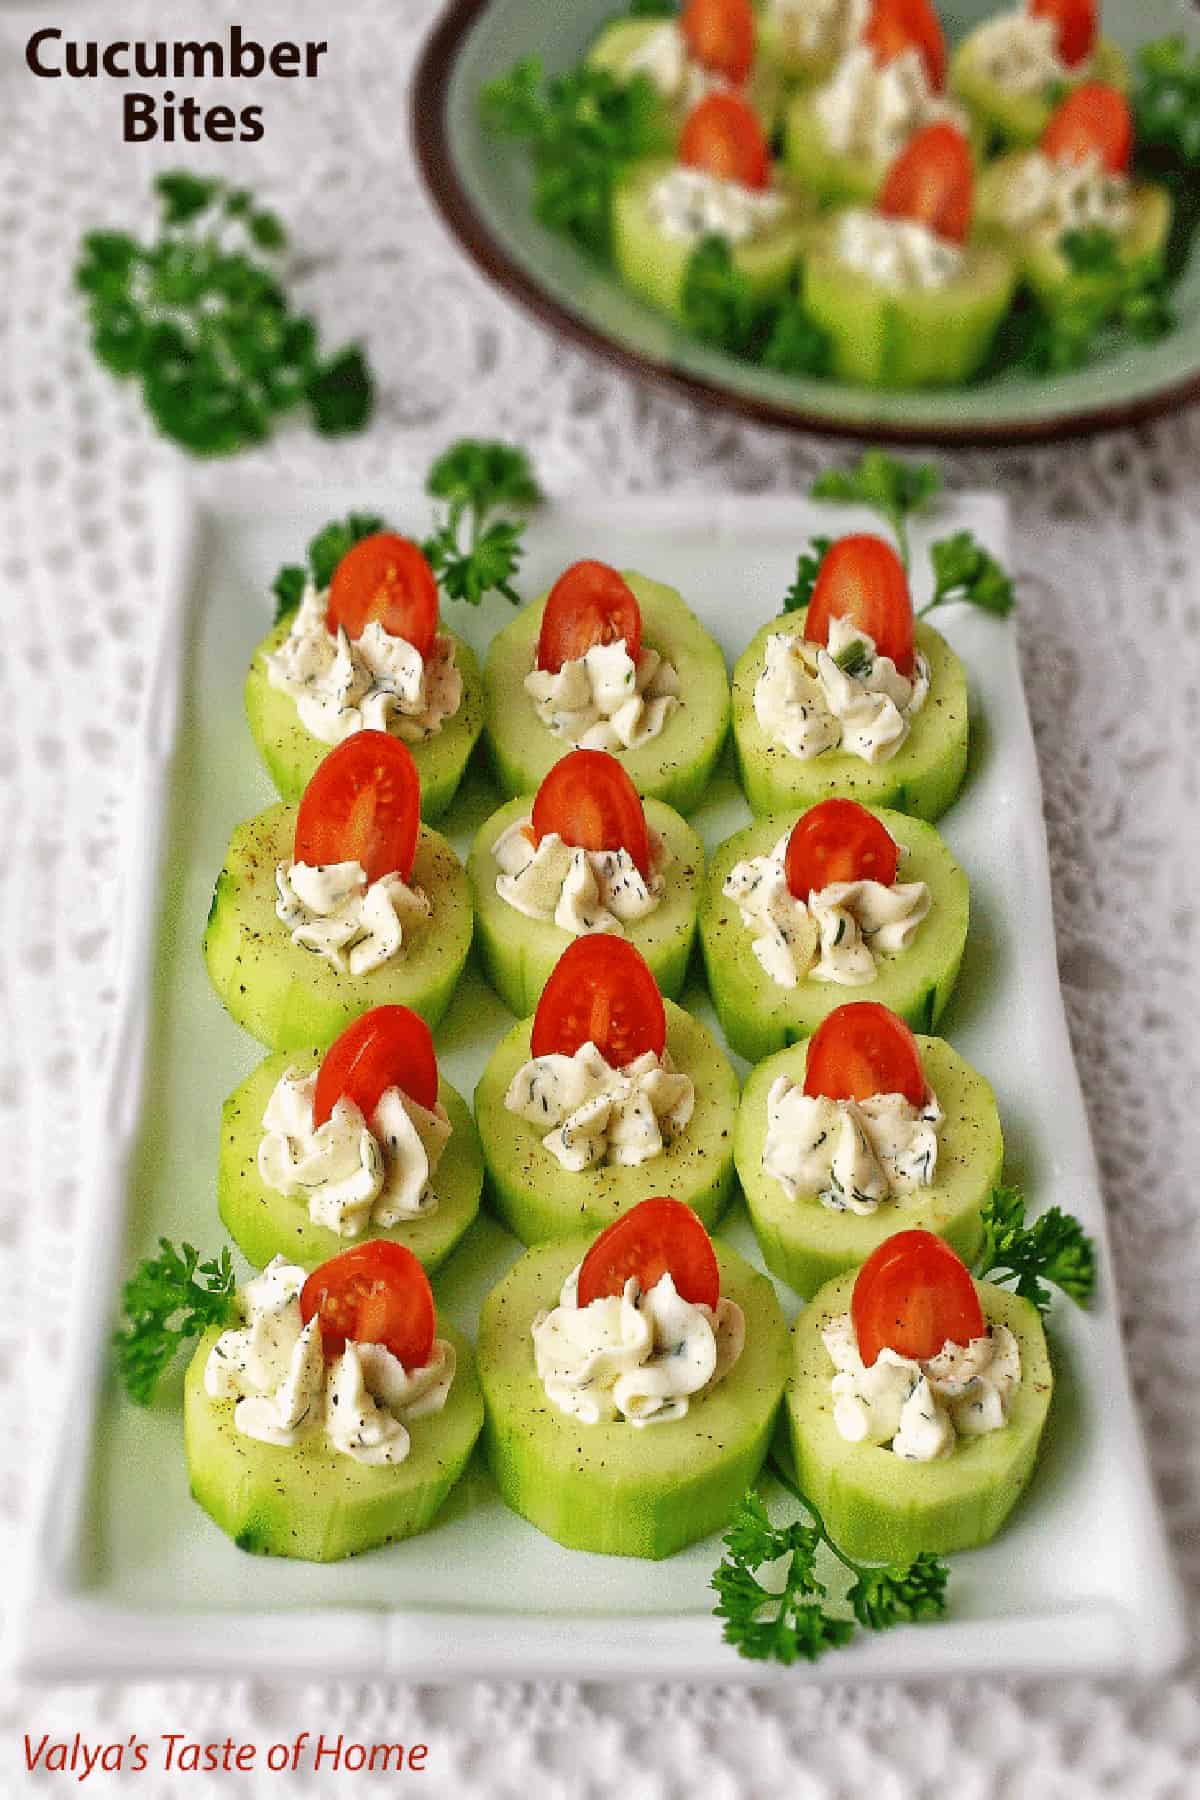 This impressive little Cucumber Bites Appetizers Recipe is fantastic for a number of reasons. They come together quickly, making them perfect for entertaining.